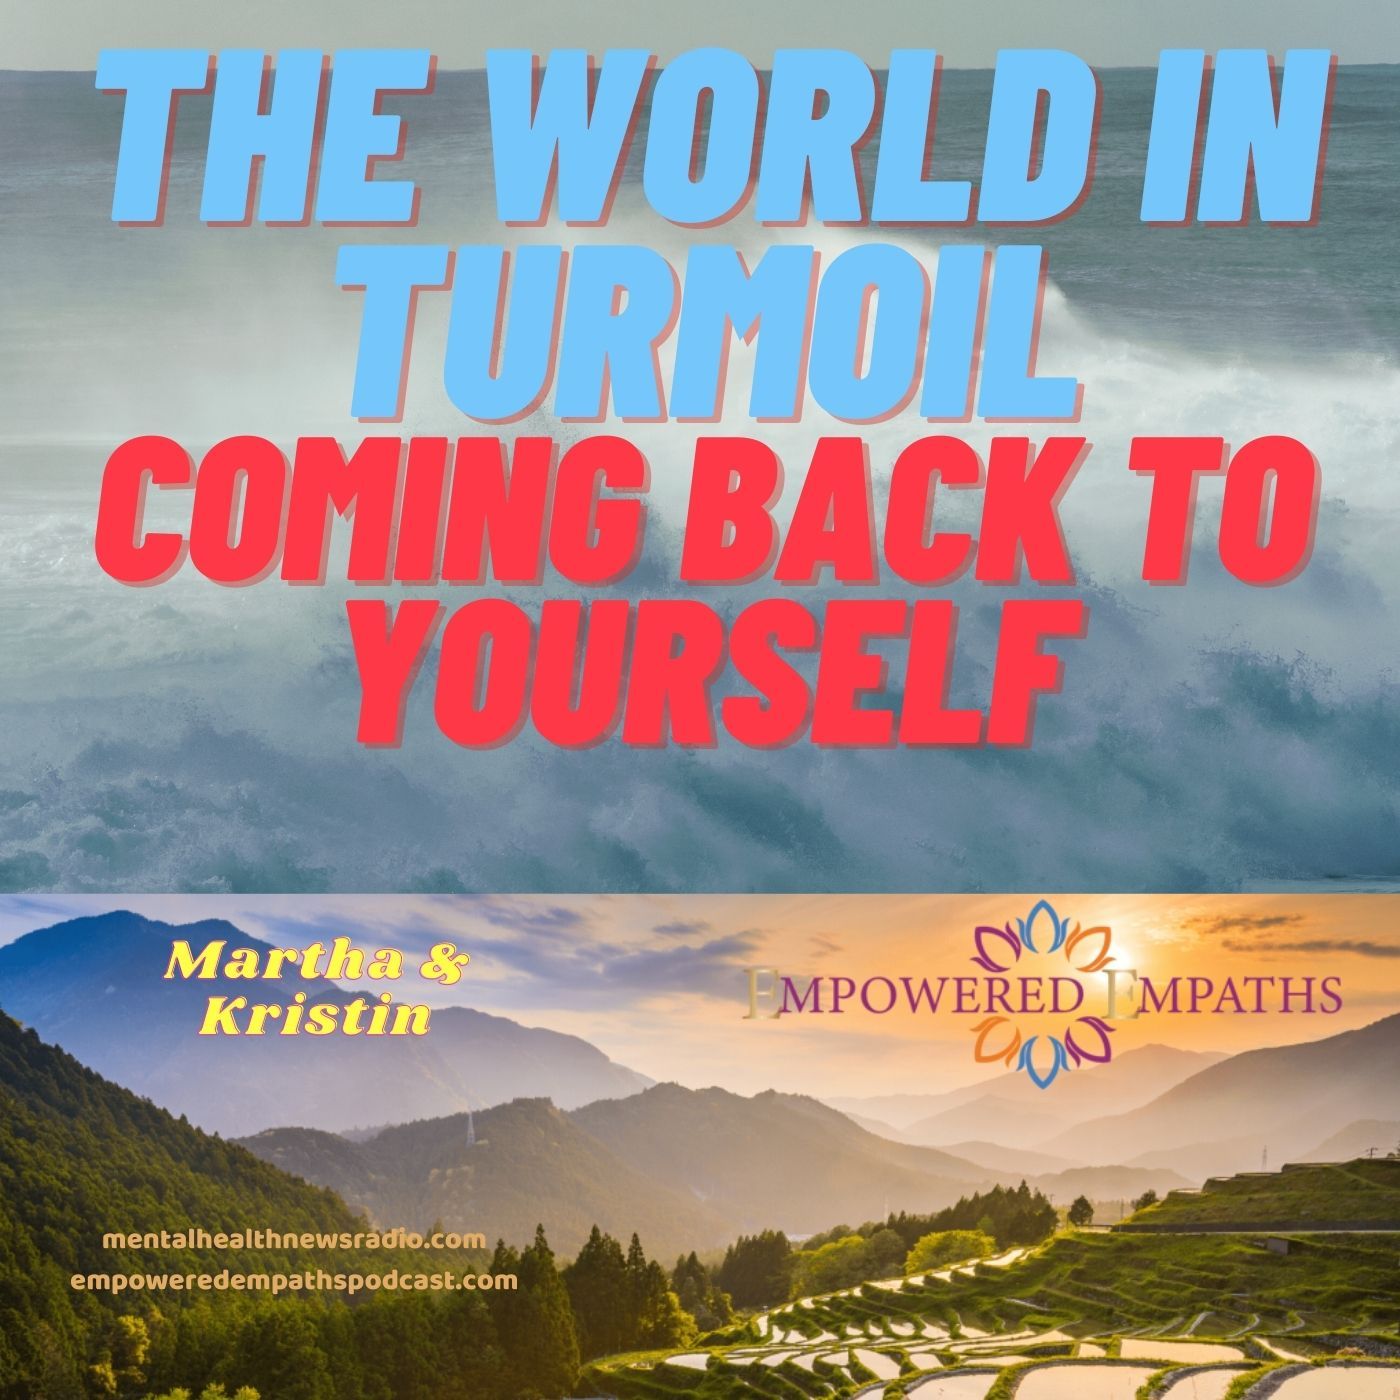 The World in Turmoil: Coming Back to Yourself